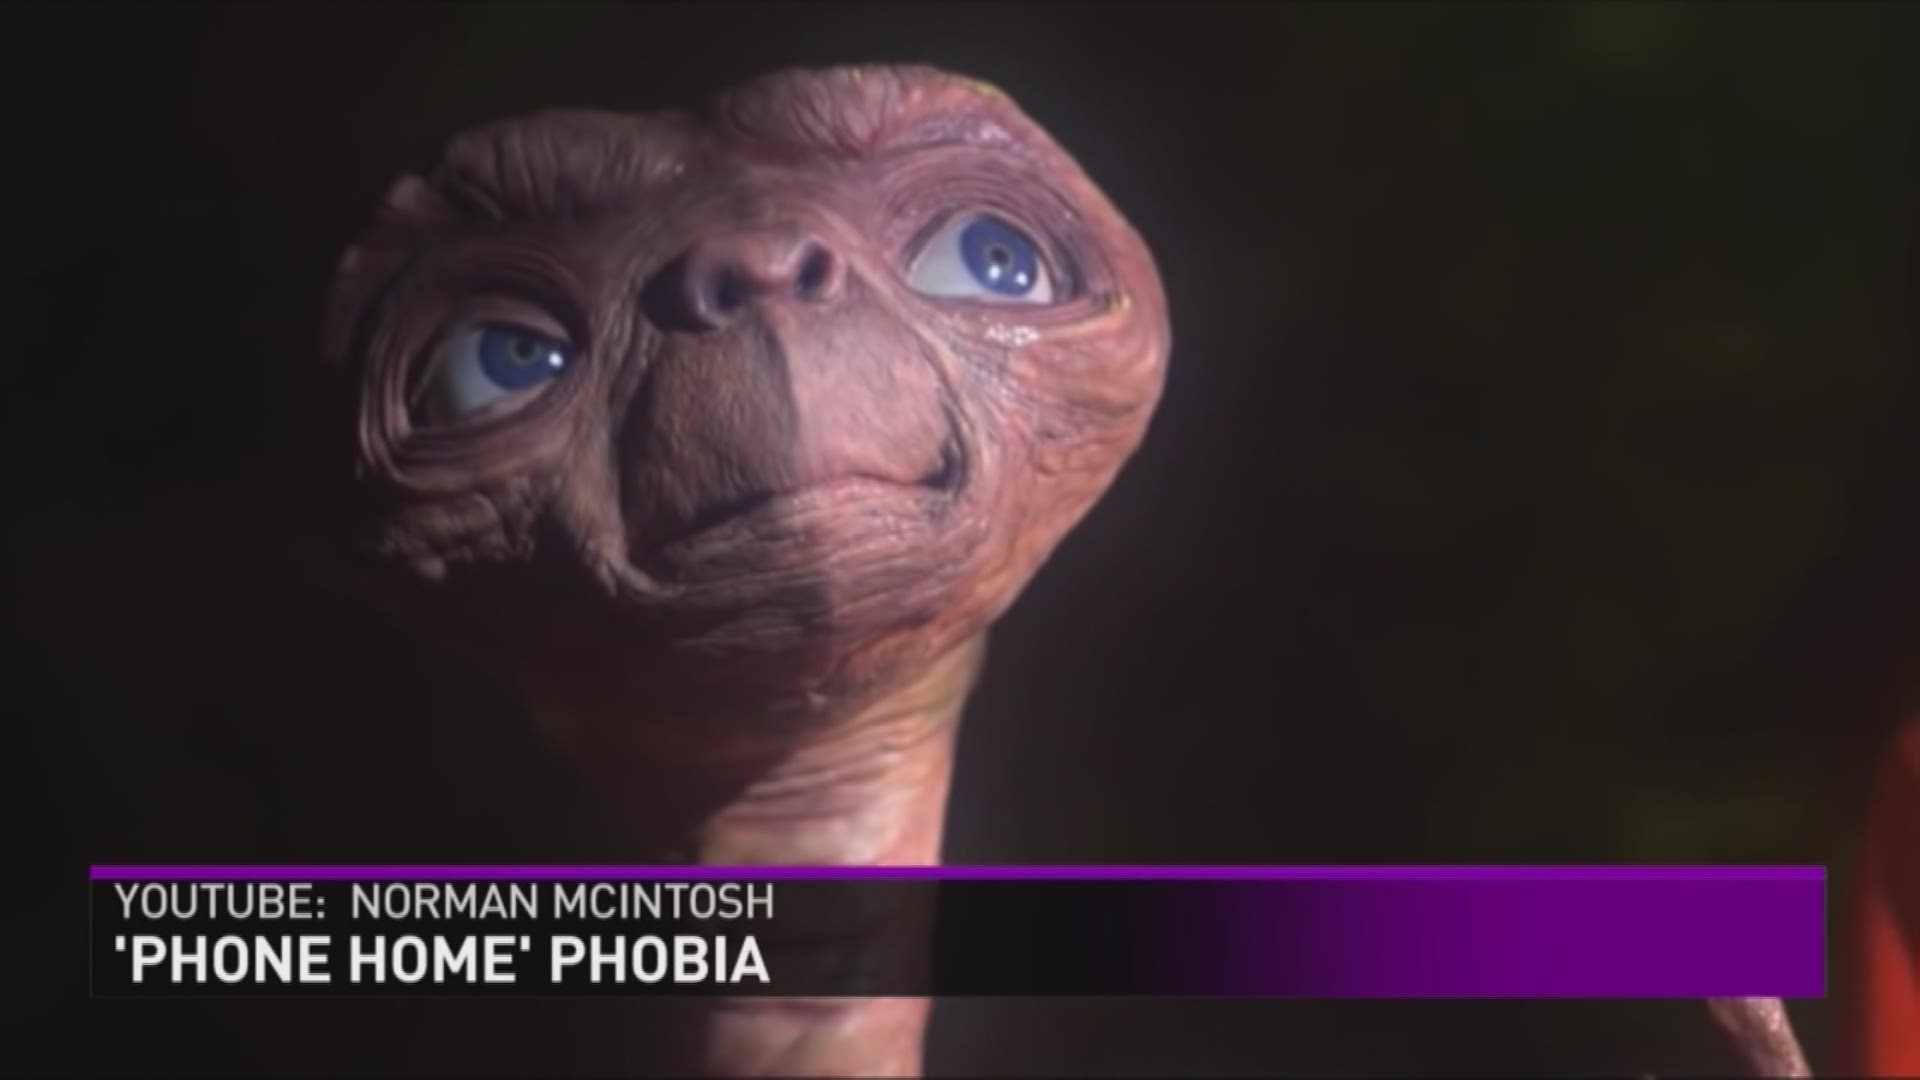 A West Texas man has a unique phobia. He's scared of E.T.